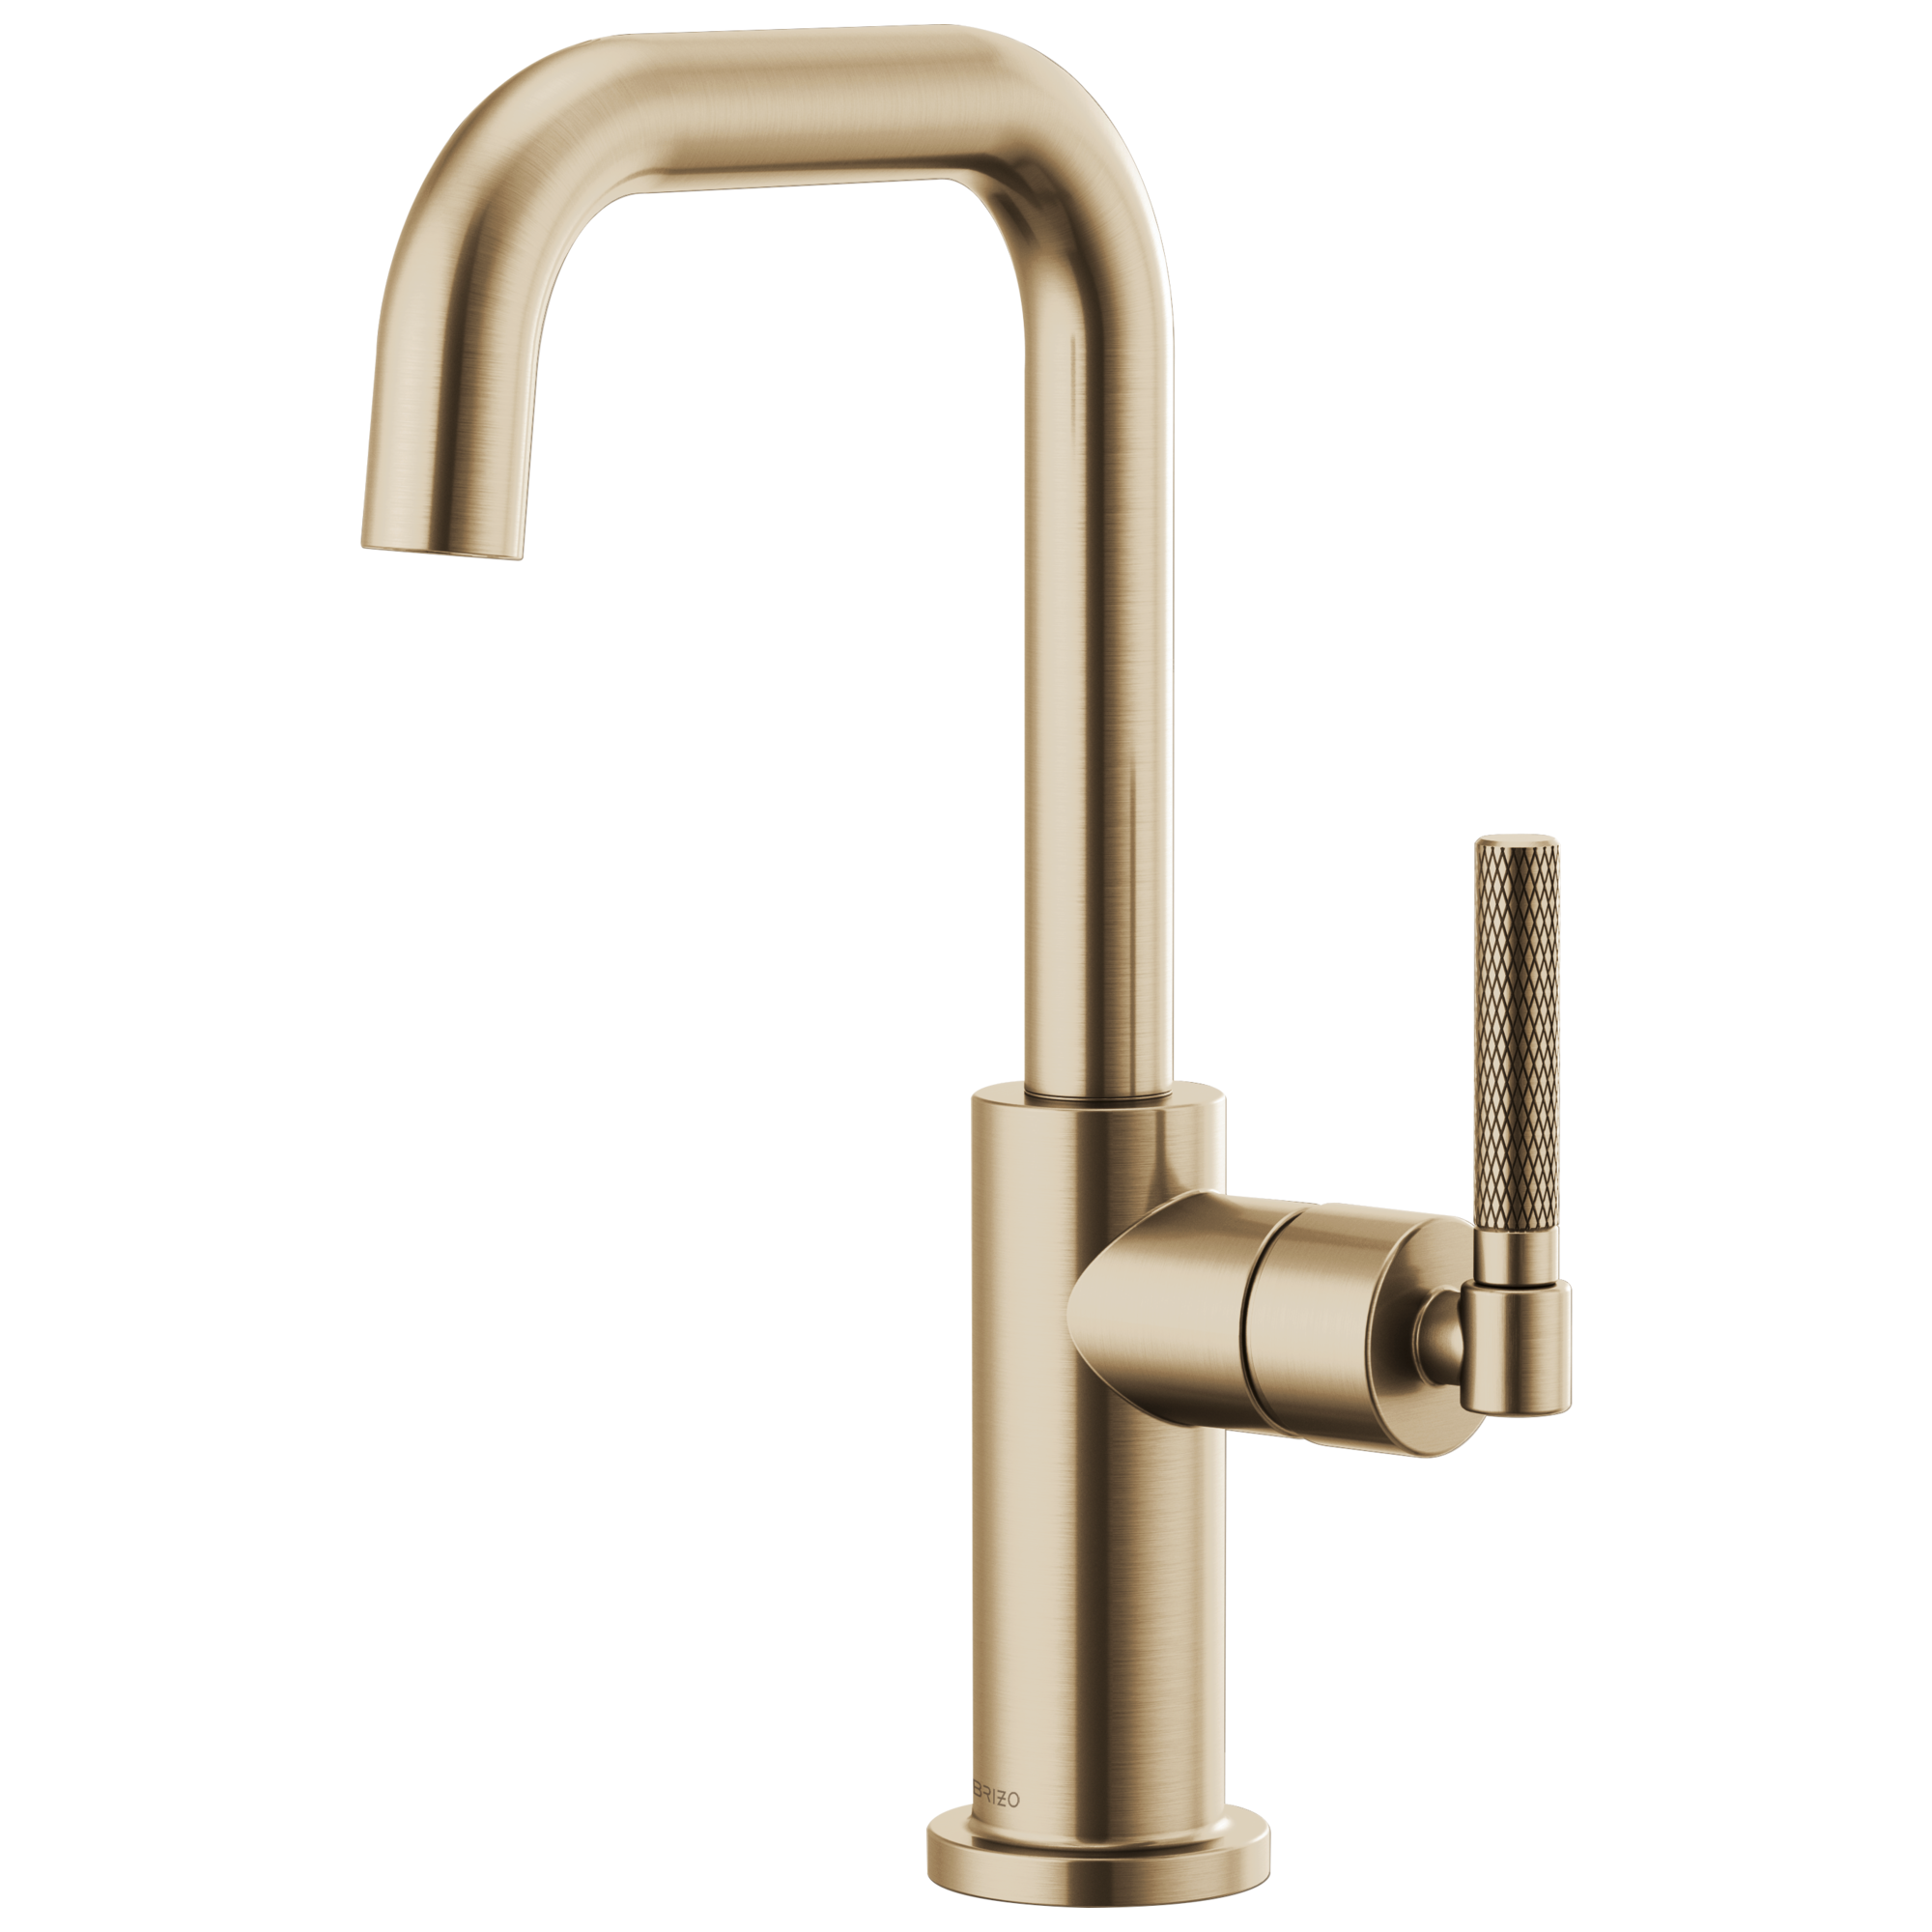 Brizo Litze Bar Faucet with Square Spout and Knurled Handle Kit